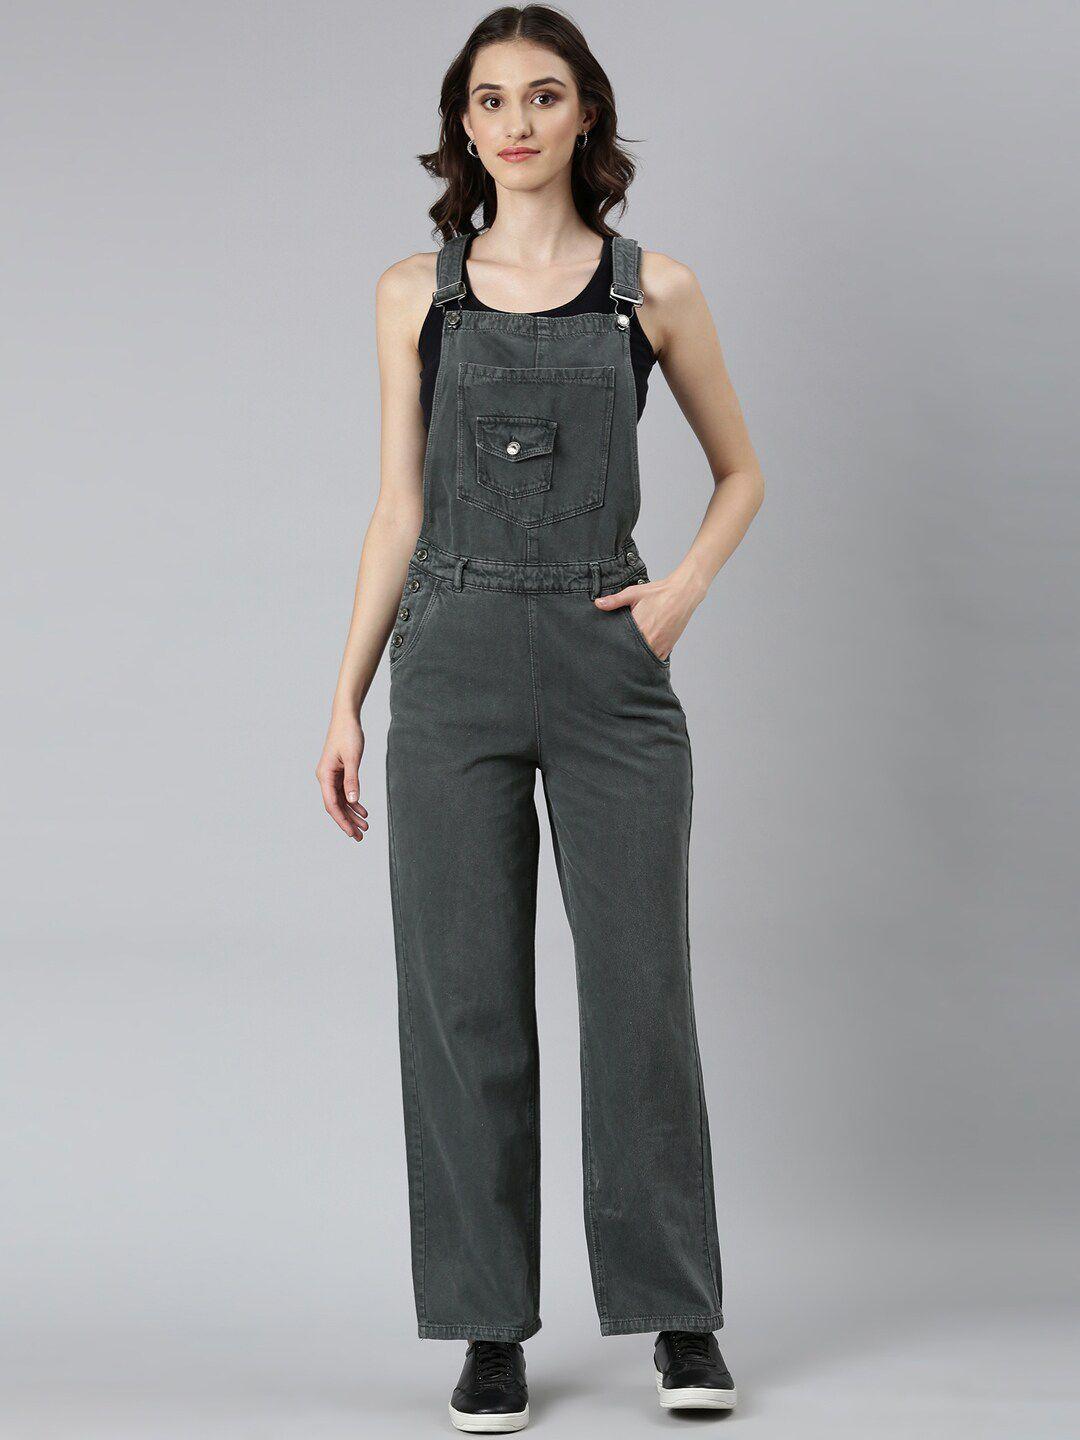 showoff straight leg ankle length overalls denim dungaree